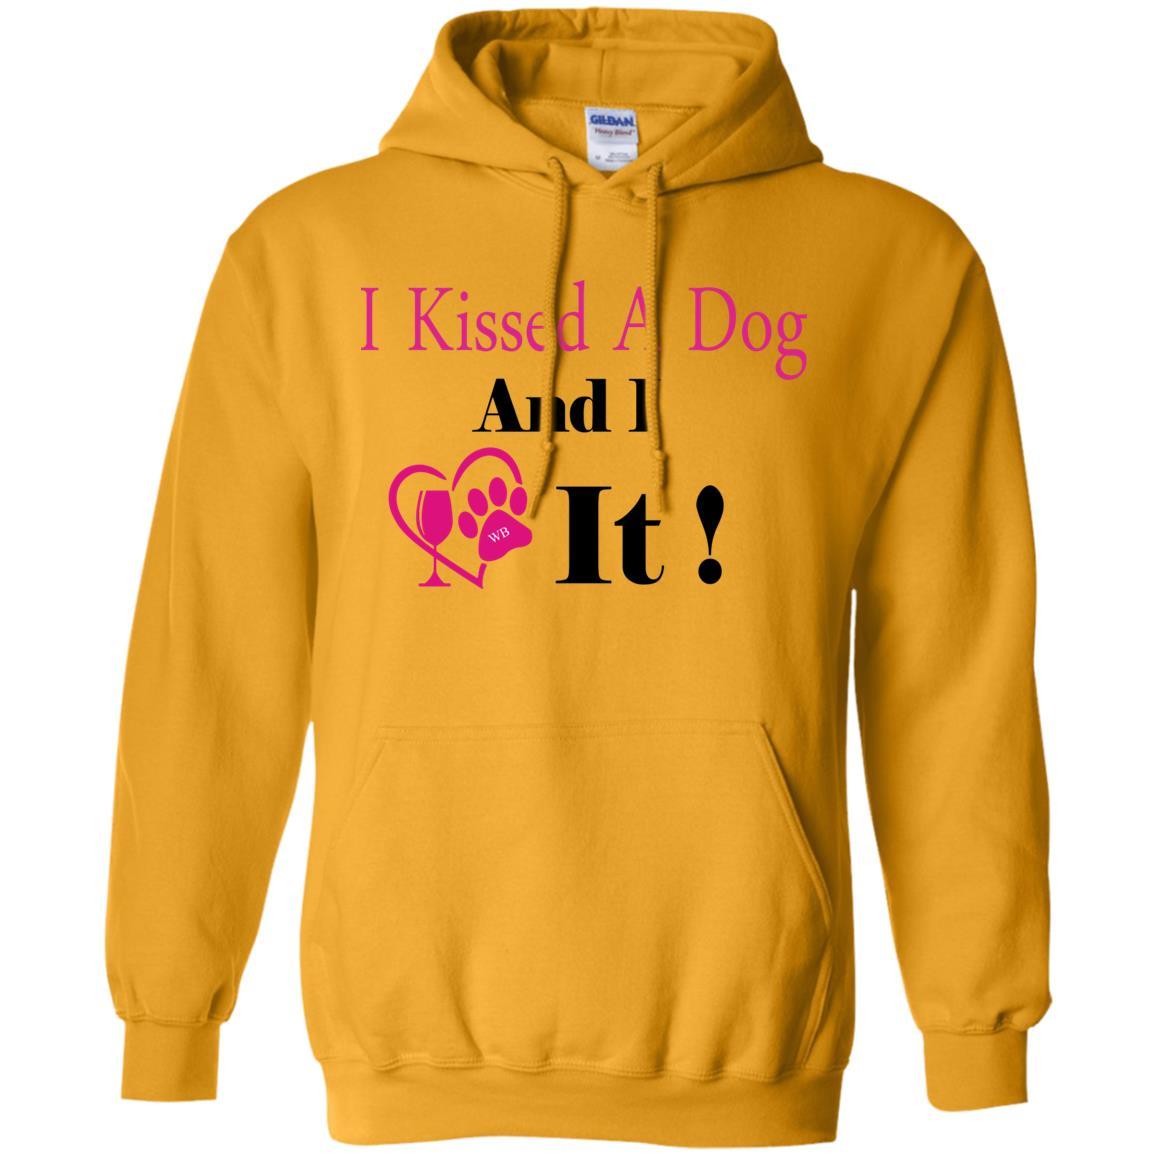 Sweatshirts Gold / S WineyBitches.co "I Kissed A Dog And I Loved It:"  Pullover Unisex Hoodie 8 oz. WineyBitchesCo